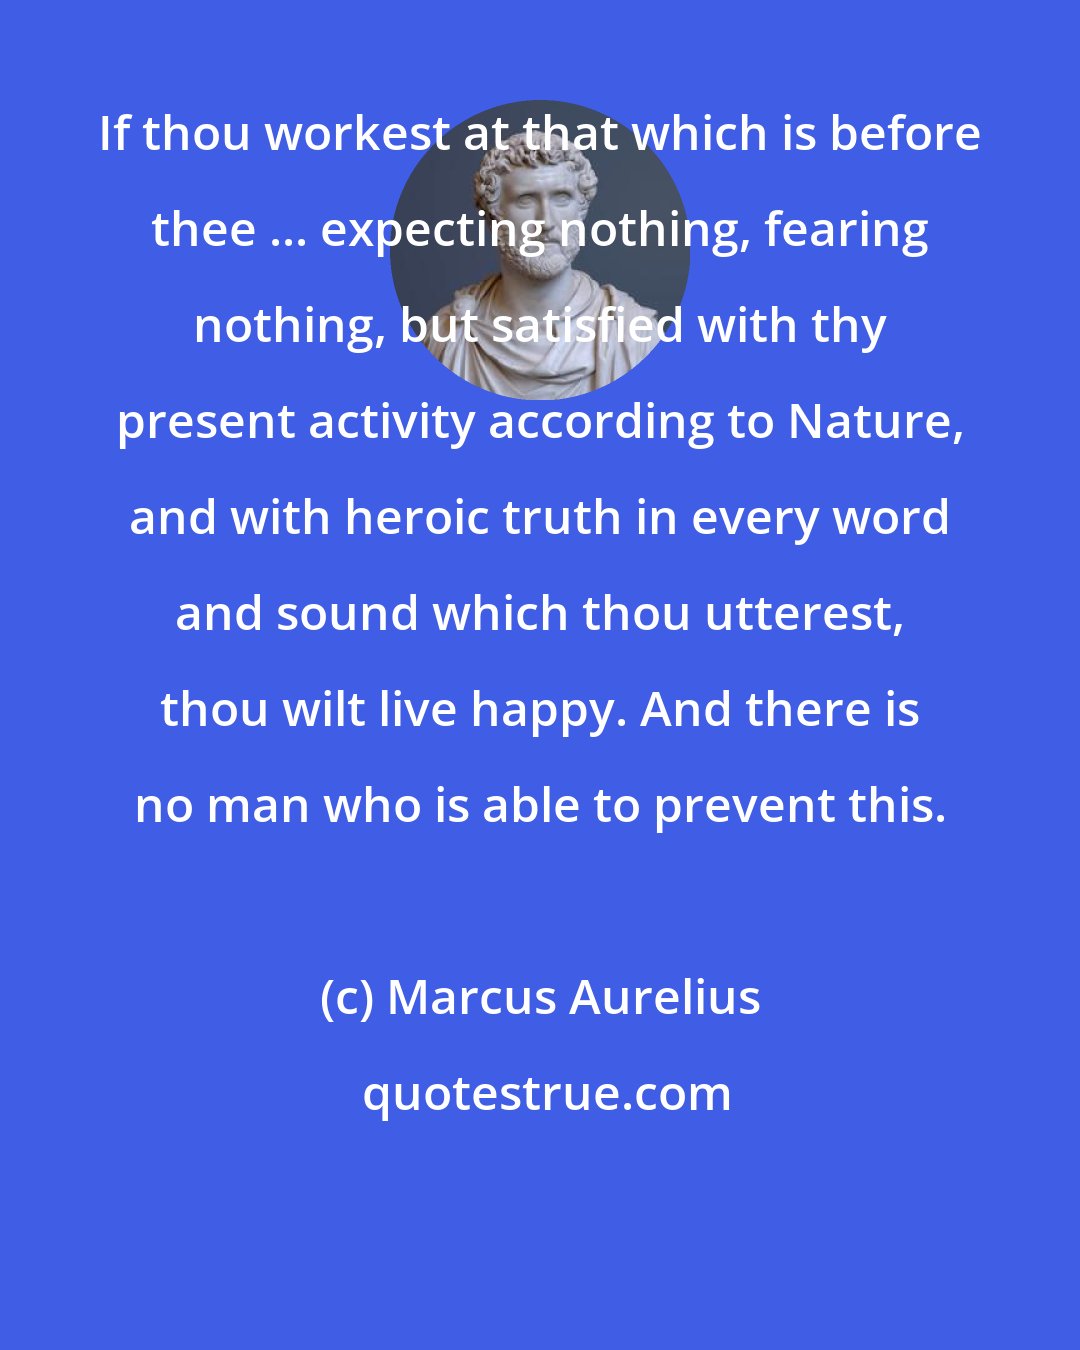 Marcus Aurelius: If thou workest at that which is before thee ... expecting nothing, fearing nothing, but satisfied with thy present activity according to Nature, and with heroic truth in every word and sound which thou utterest, thou wilt live happy. And there is no man who is able to prevent this.